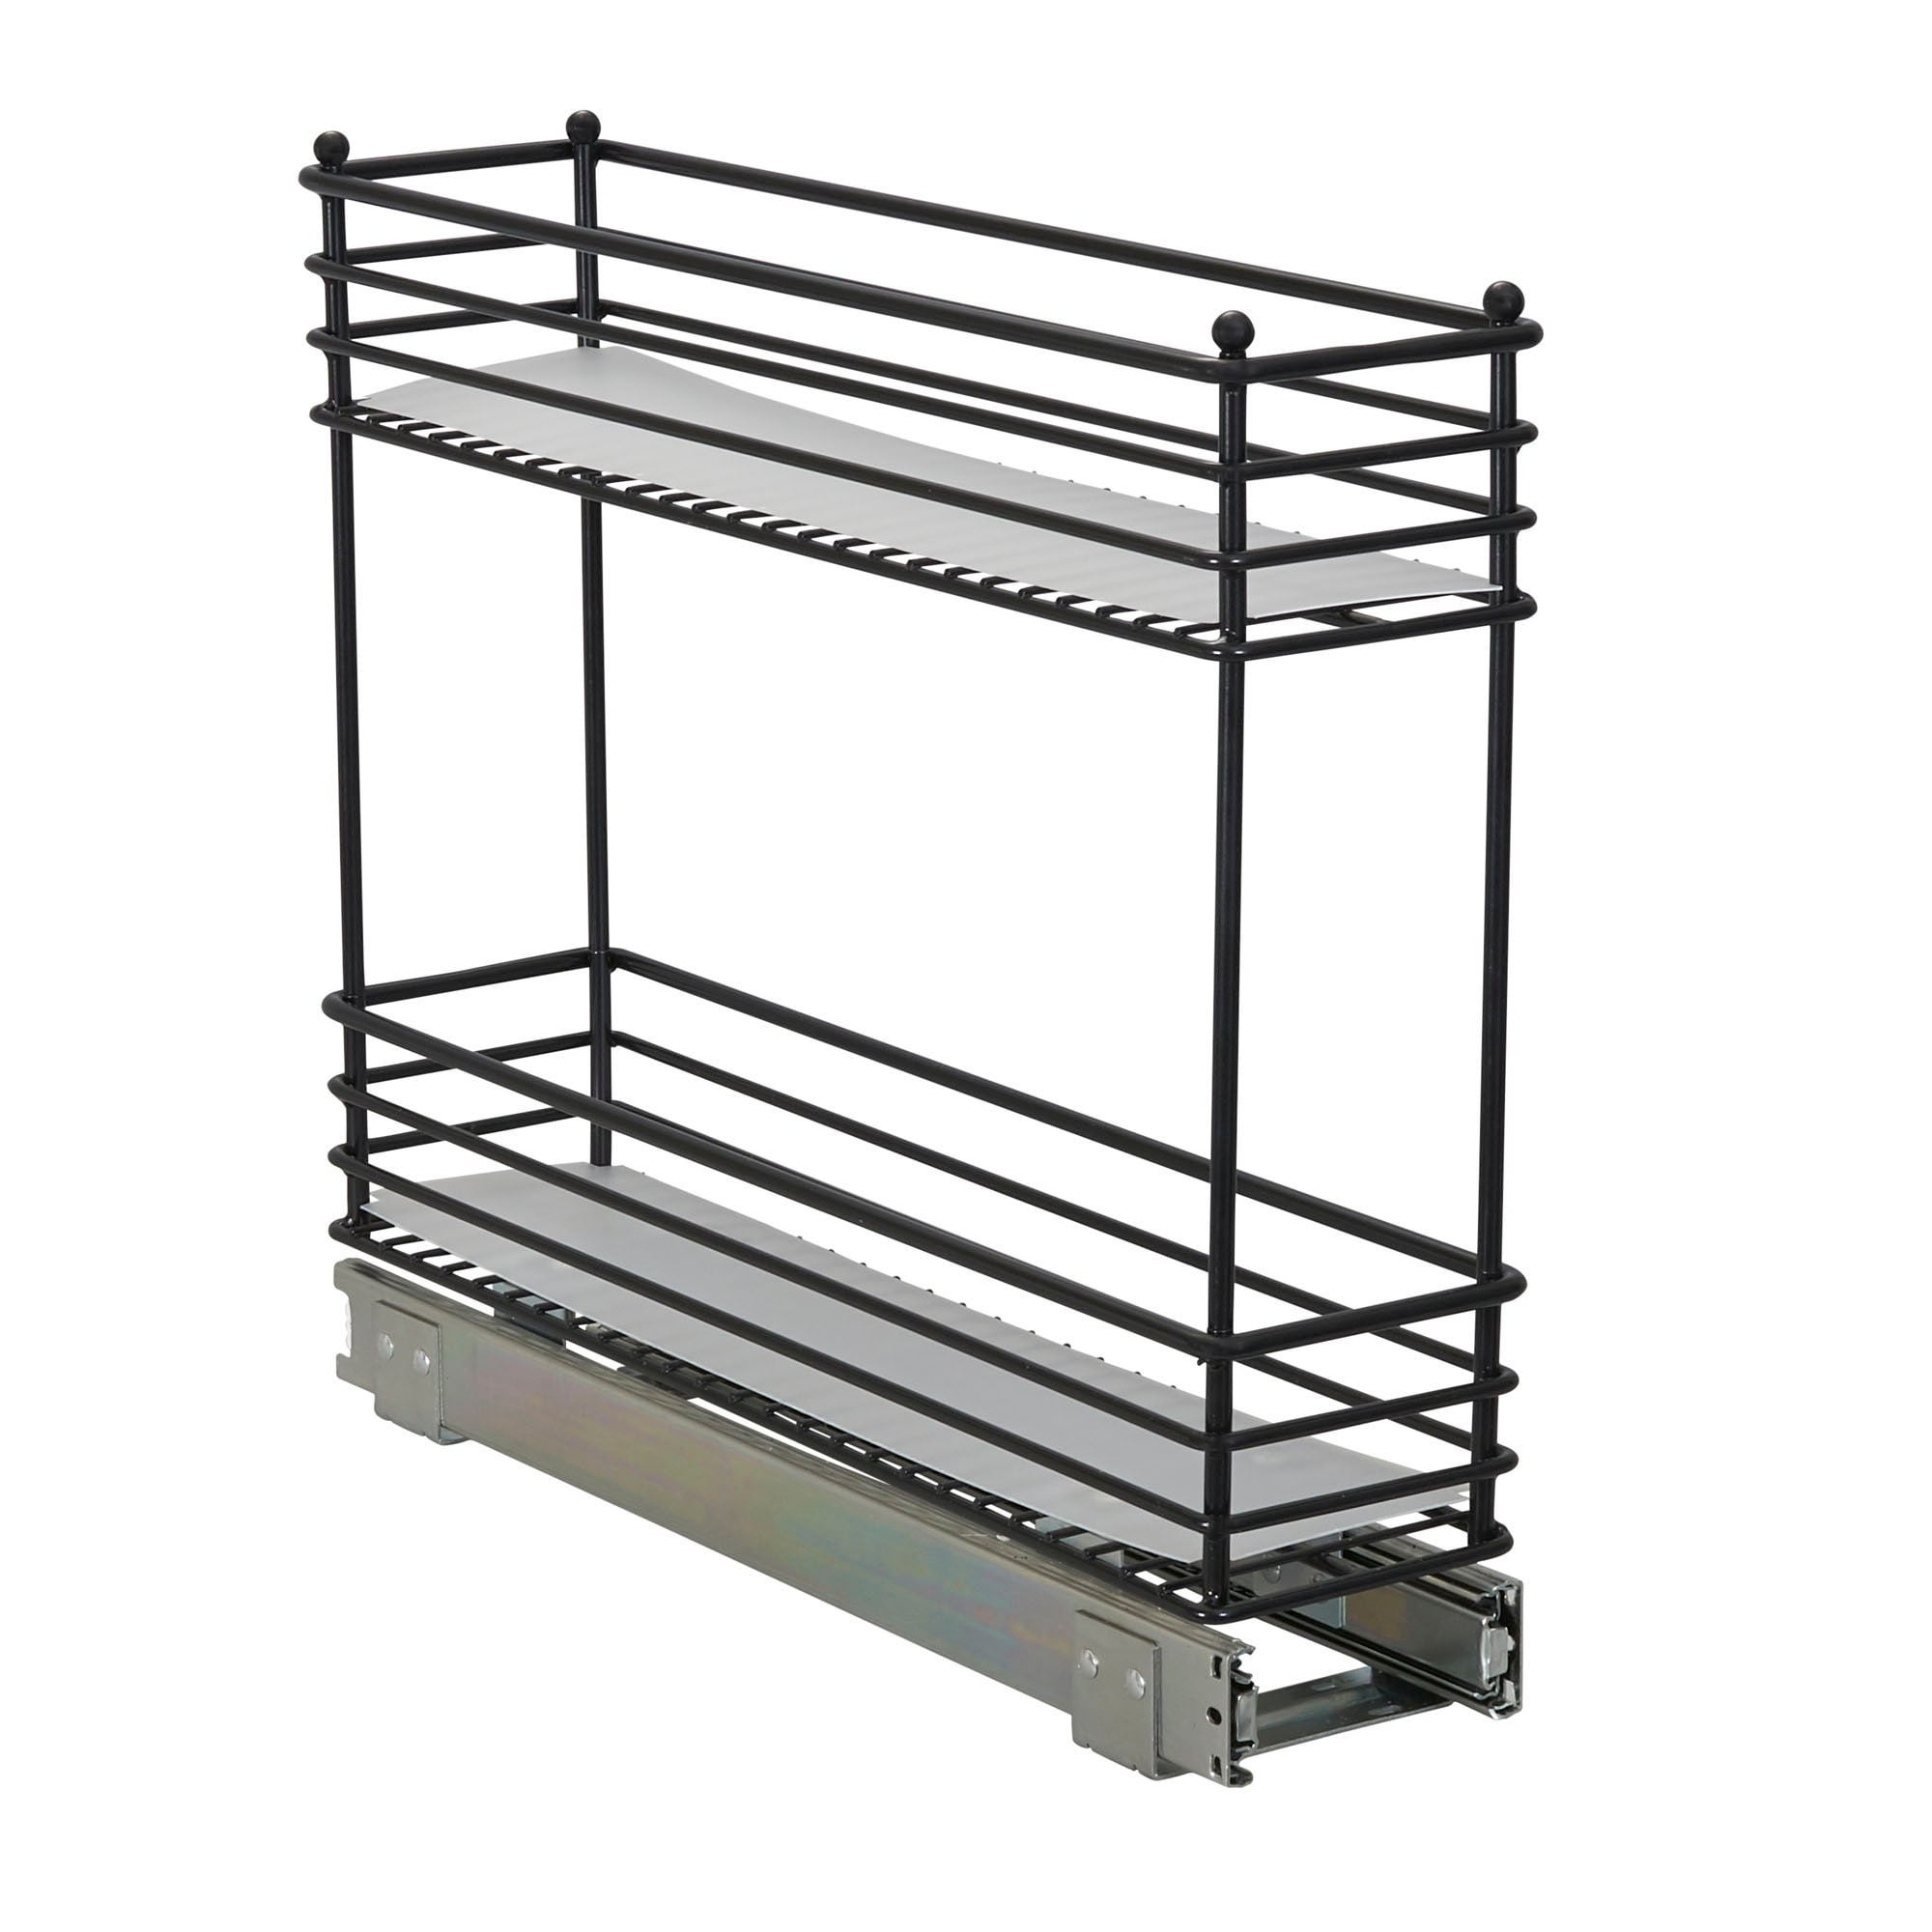 https://ak1.ostkcdn.com/images/products/is/images/direct/b65552d6245a337c2ccf9a2710363ff8b166e43b/Glidez-Pull-Out-Slide-Out-Storage-Organizer-with-Plastic-Liners---2-Tier-Design.jpg